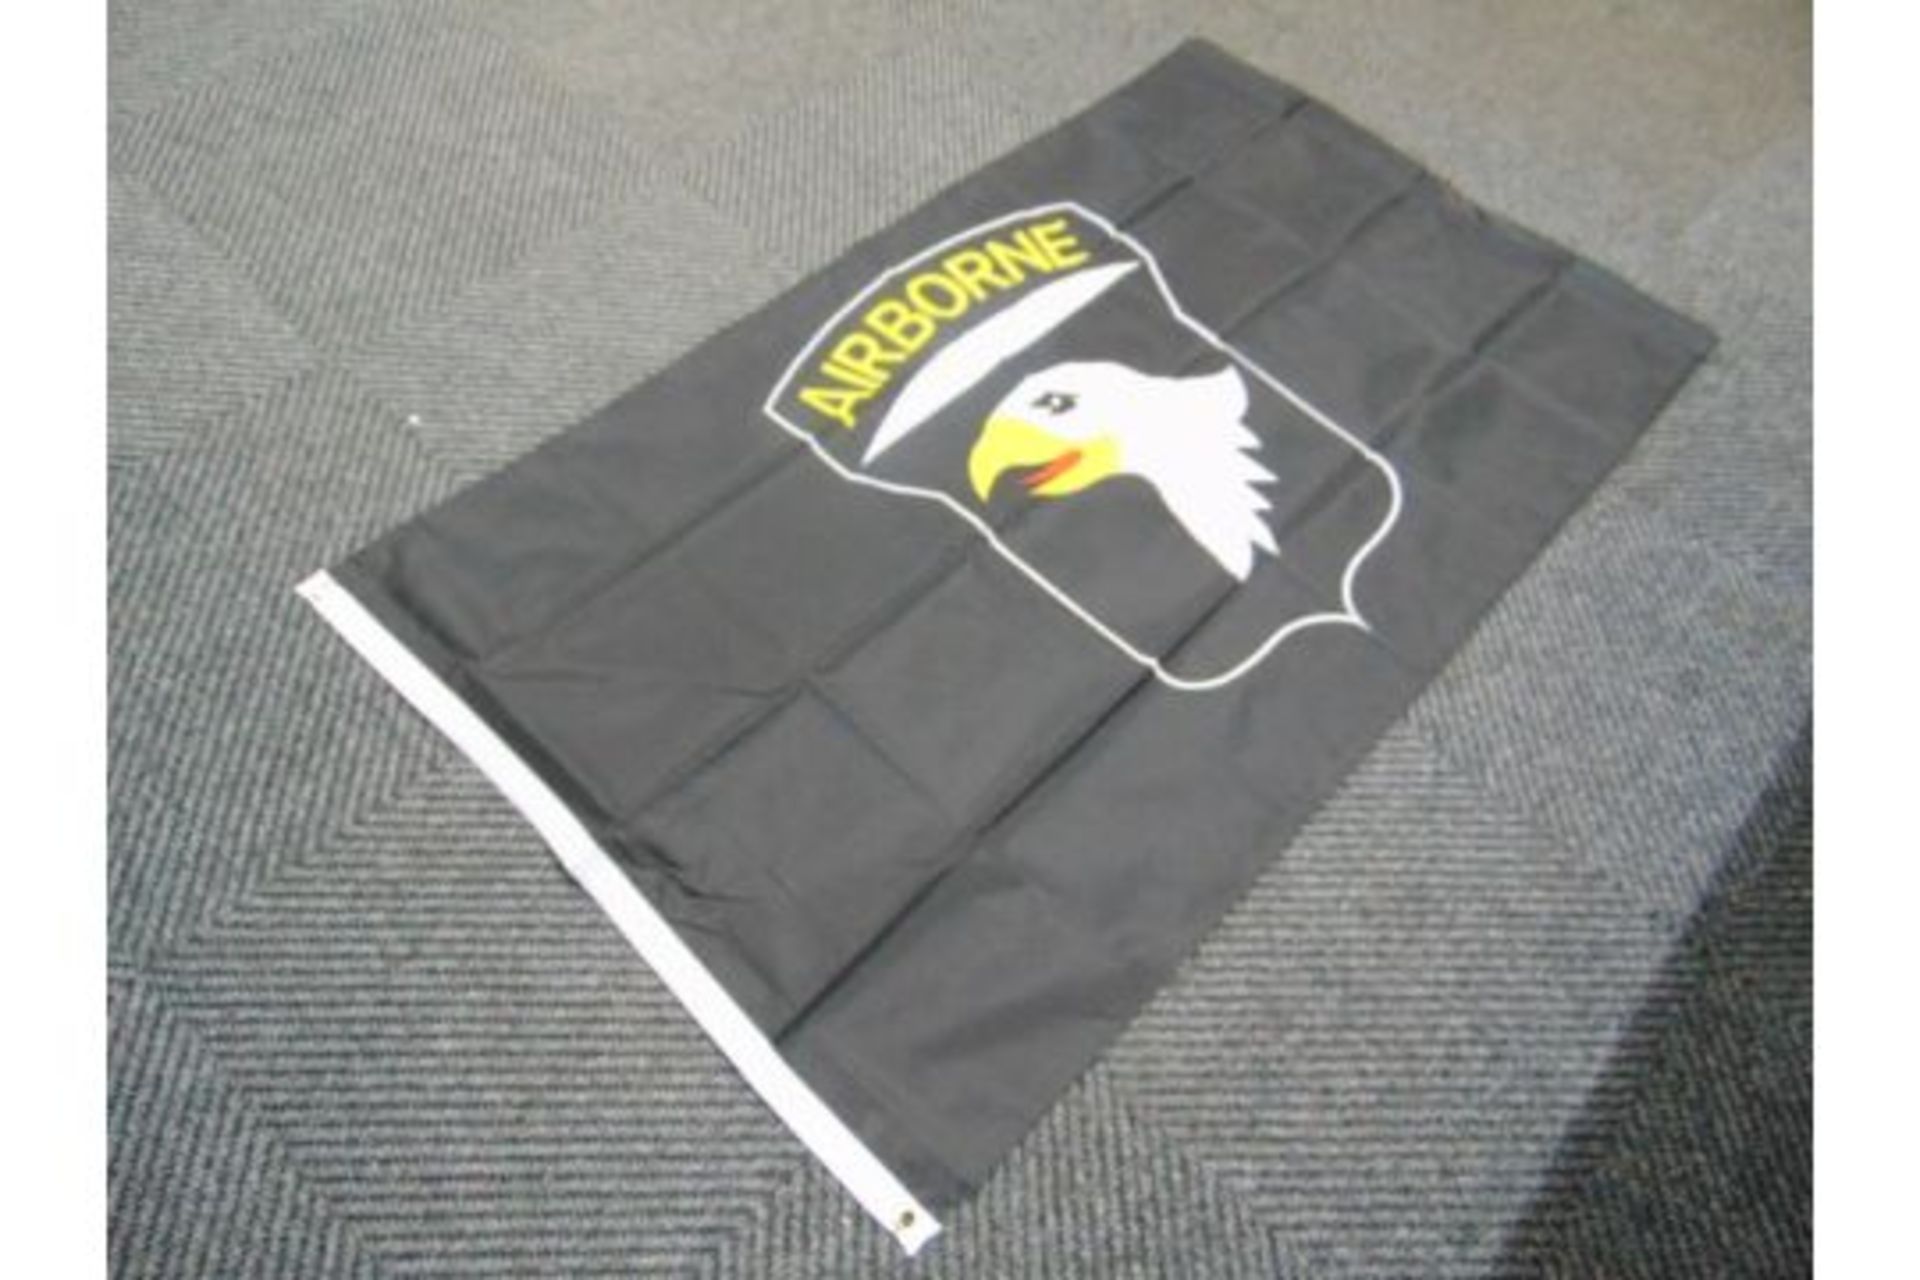 101st Airborne (Black) Flag - 5ft x 3ft with metal eyelets